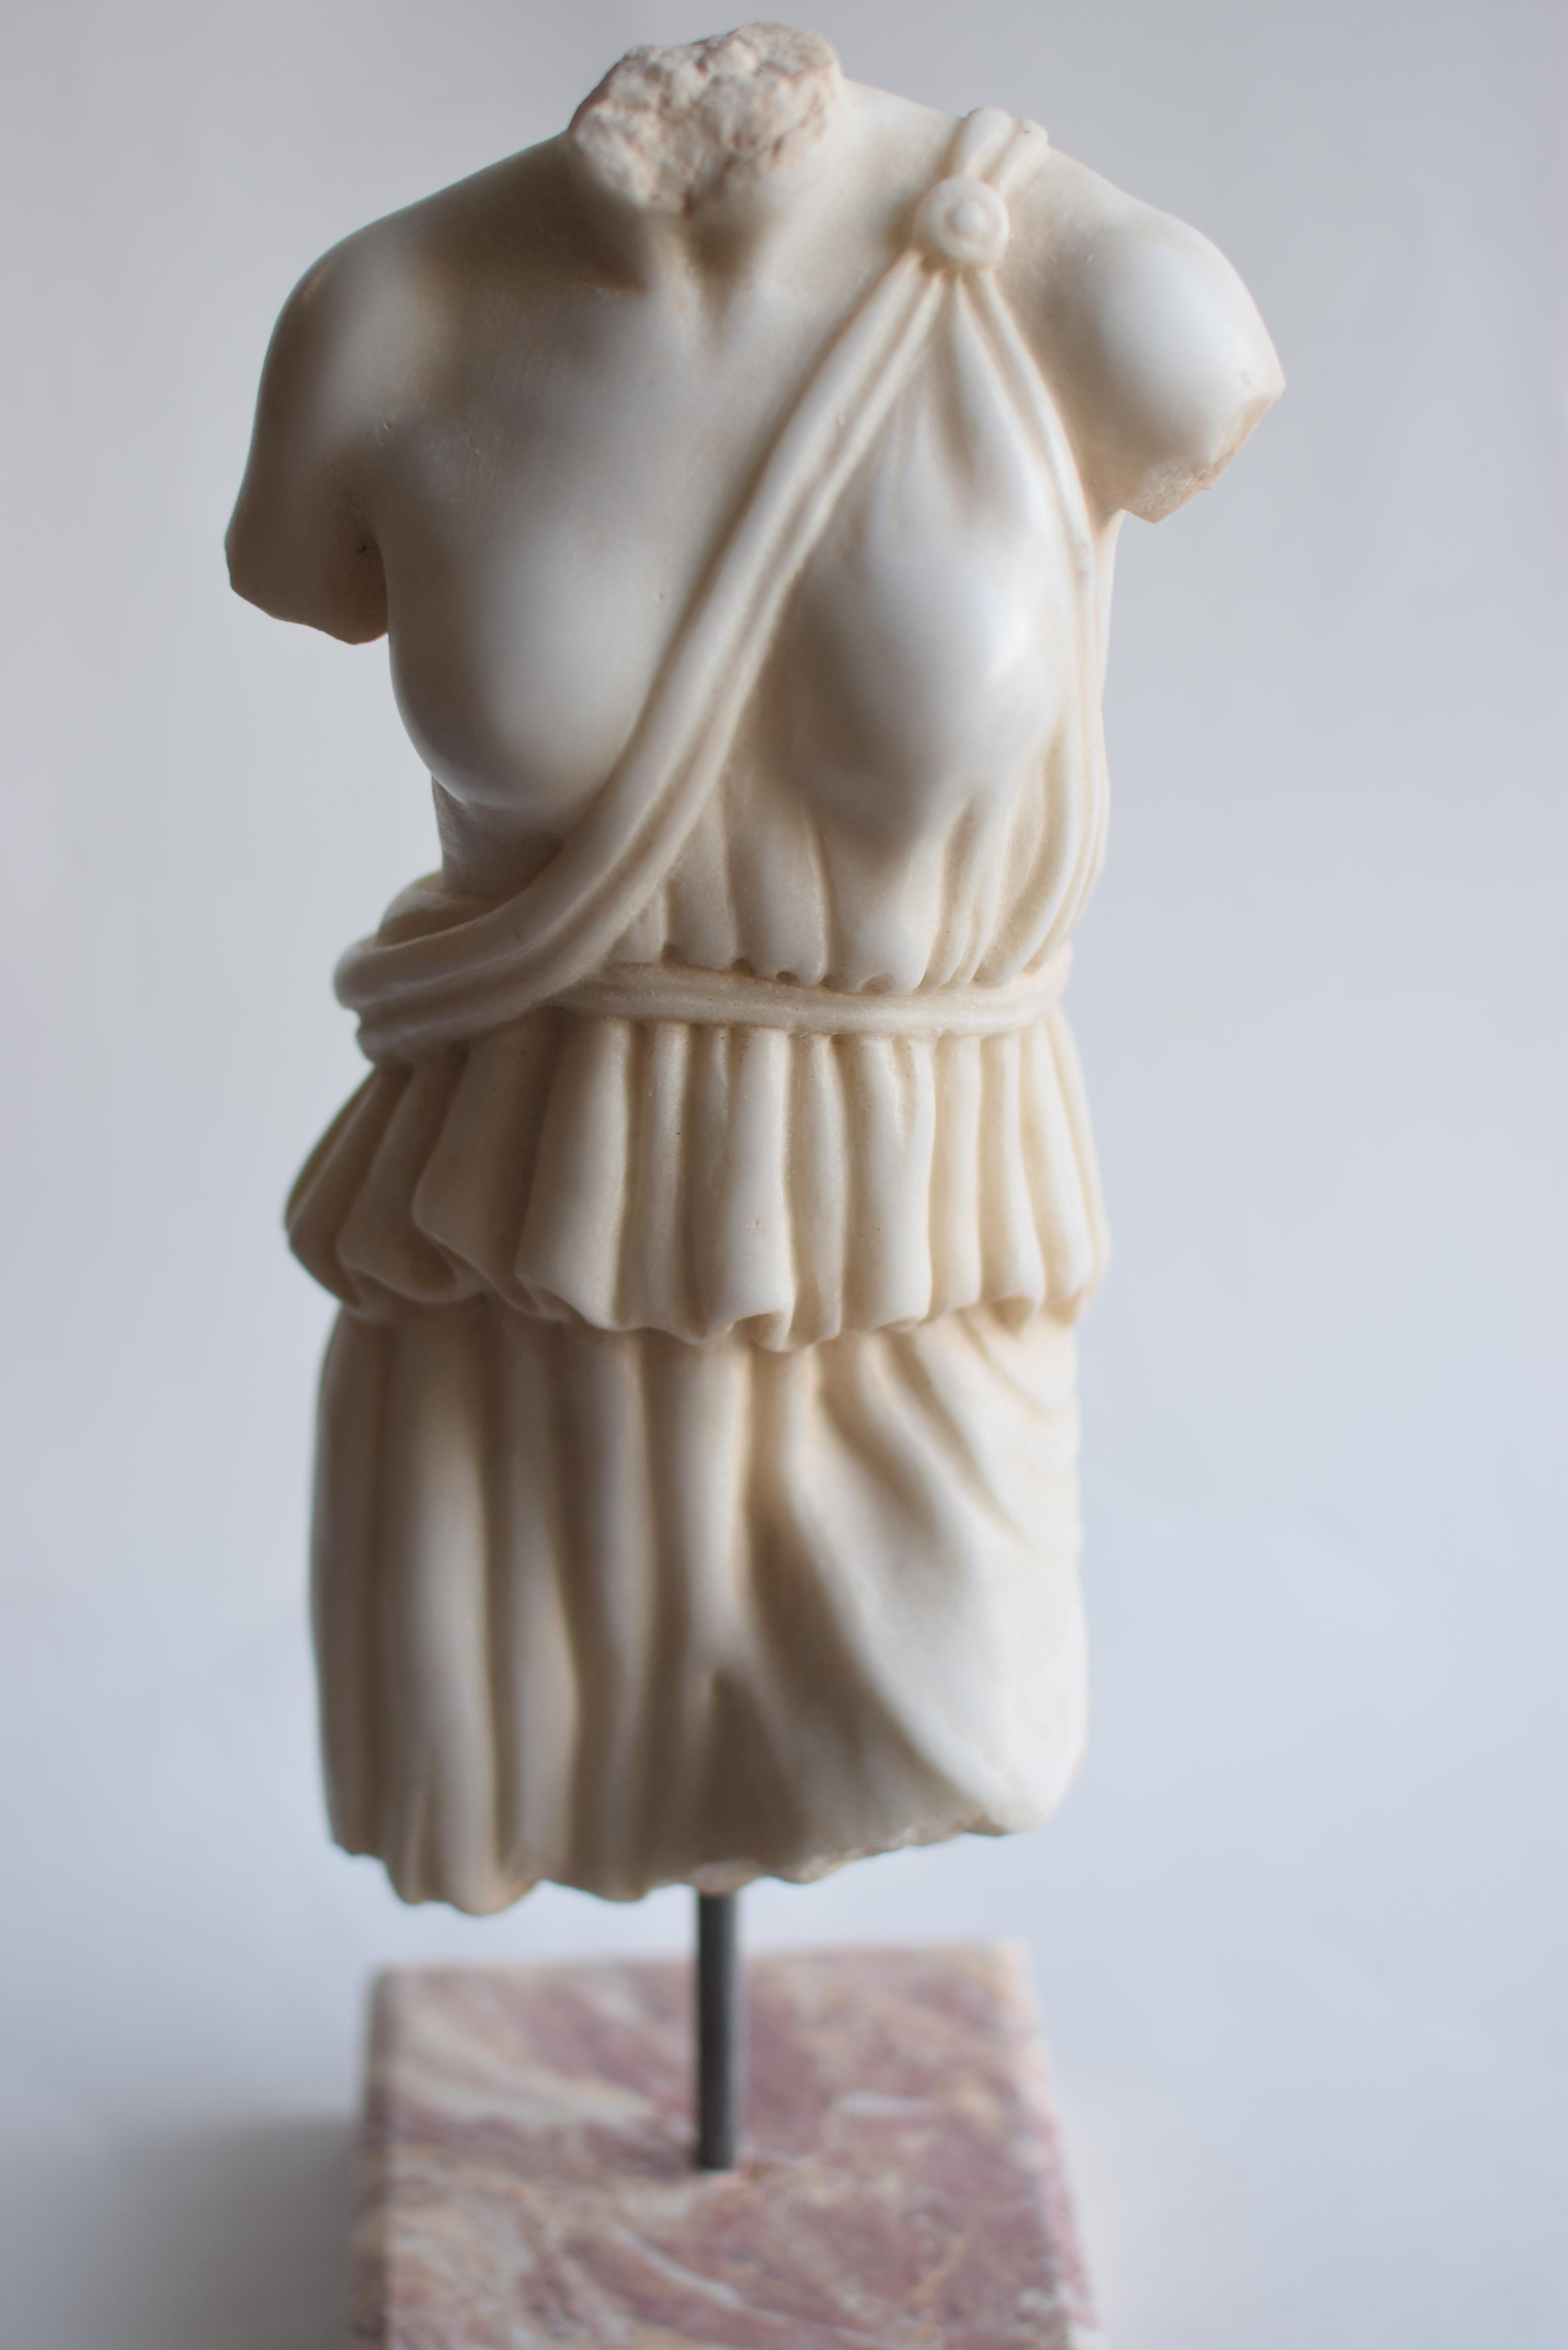 Sculpture, Female torso, classical art, Greek art, Torso, white Carrara marble, classical sculpture, ancient torso
Female torso with toga carved on beautiful white Carrara marble, original model.
Resting on a base of pink Peralba marble and